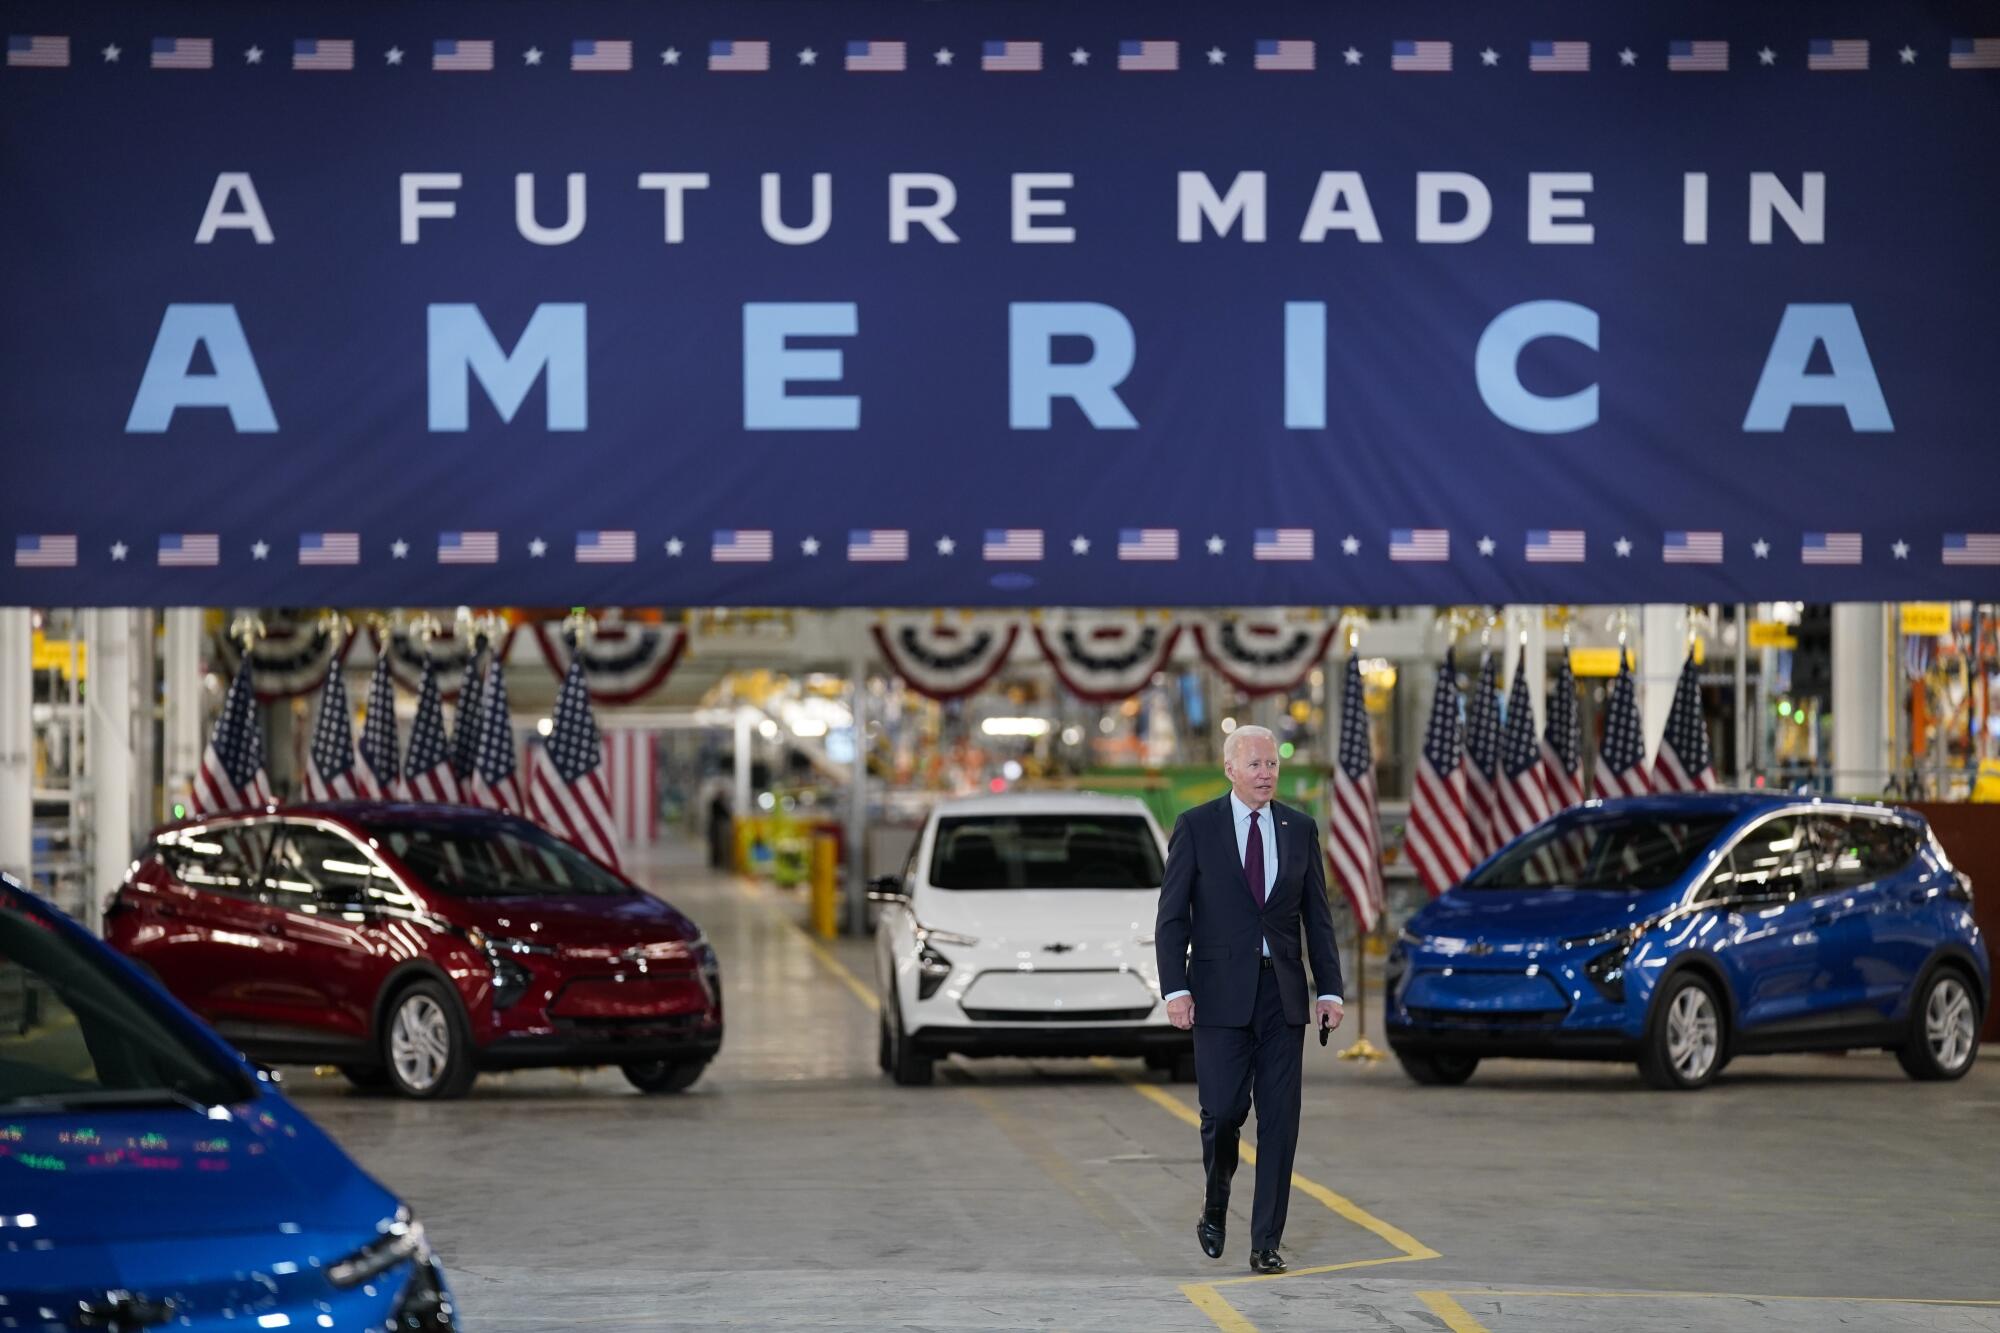 President Biden walks, with cars behind him, under a sign that reads "A Future Made in America"